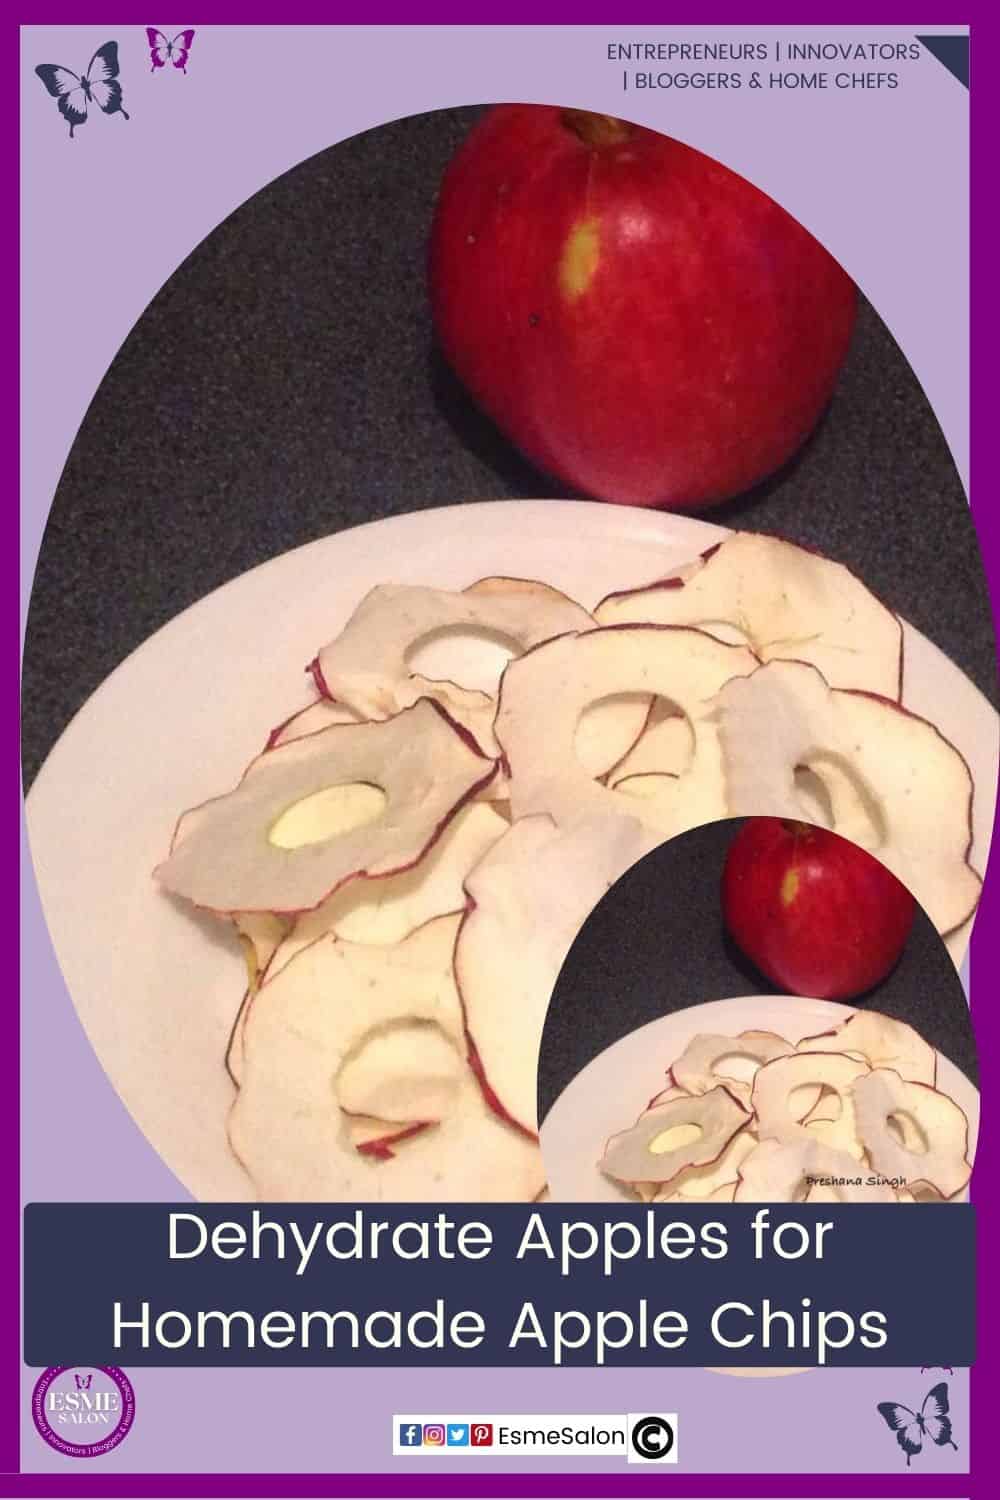 an image of a red apple as well as dehydrated Homemade Apple Chips on a white plate